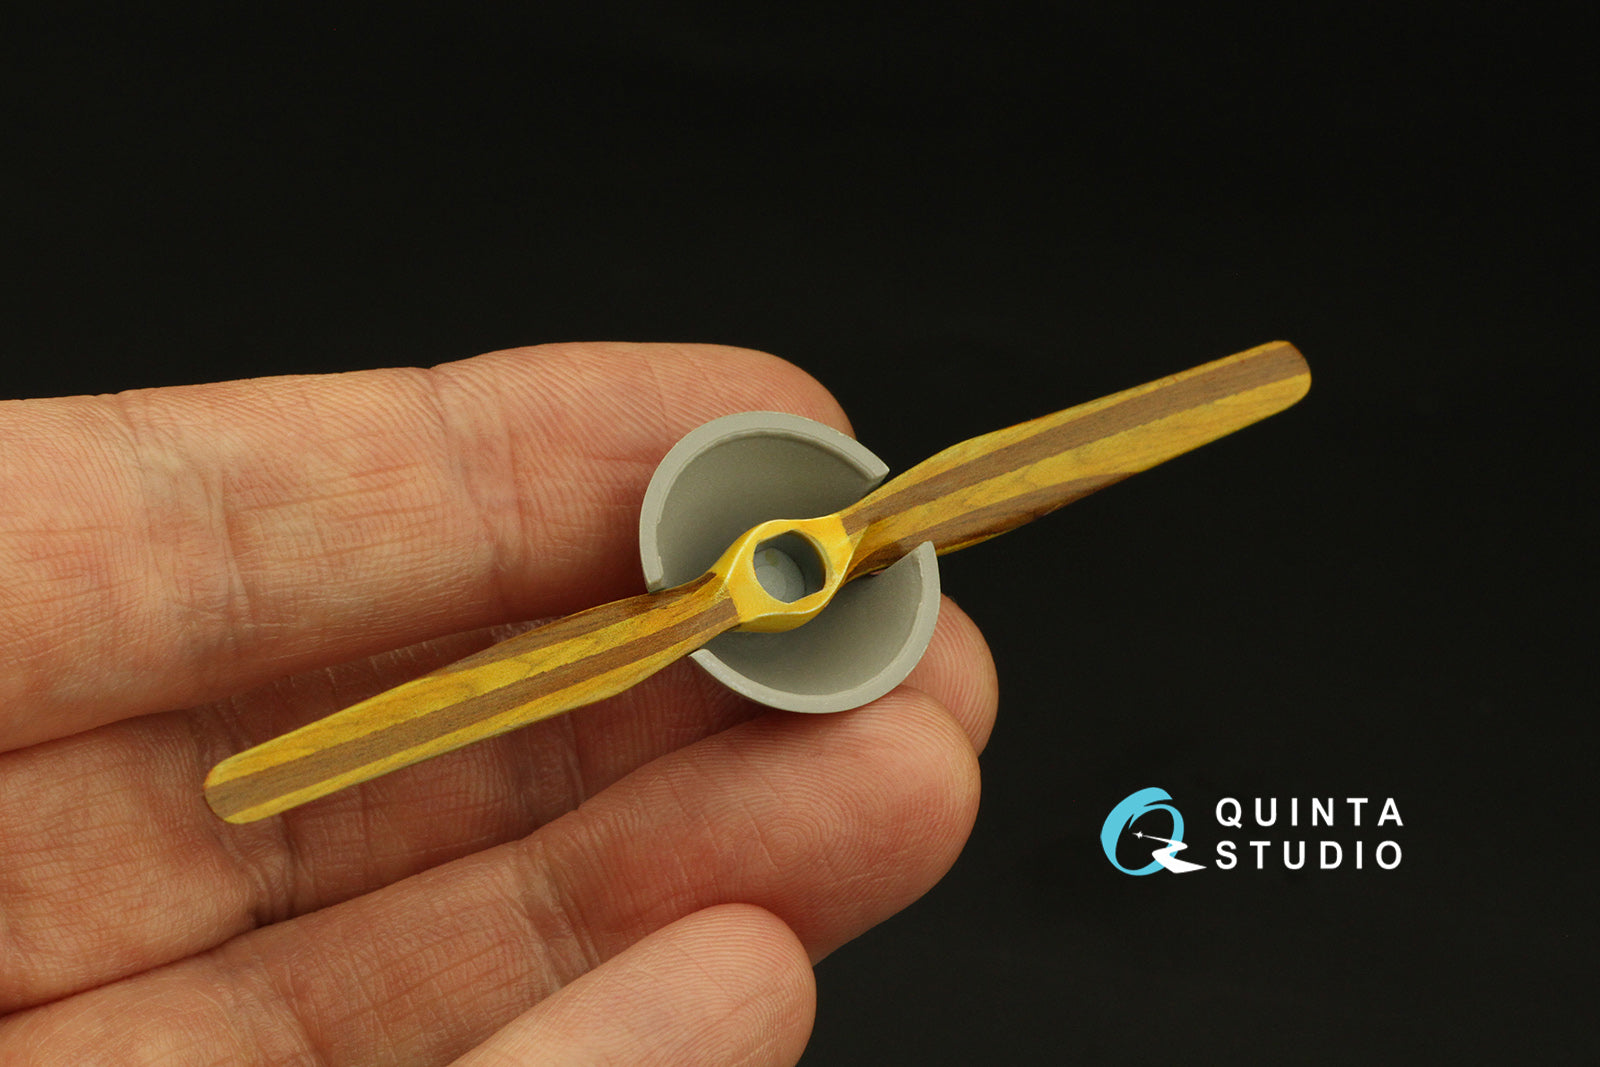 Quinta Studio - 1/32 Wooden Propellers Axial QL32008 for WNW Kit